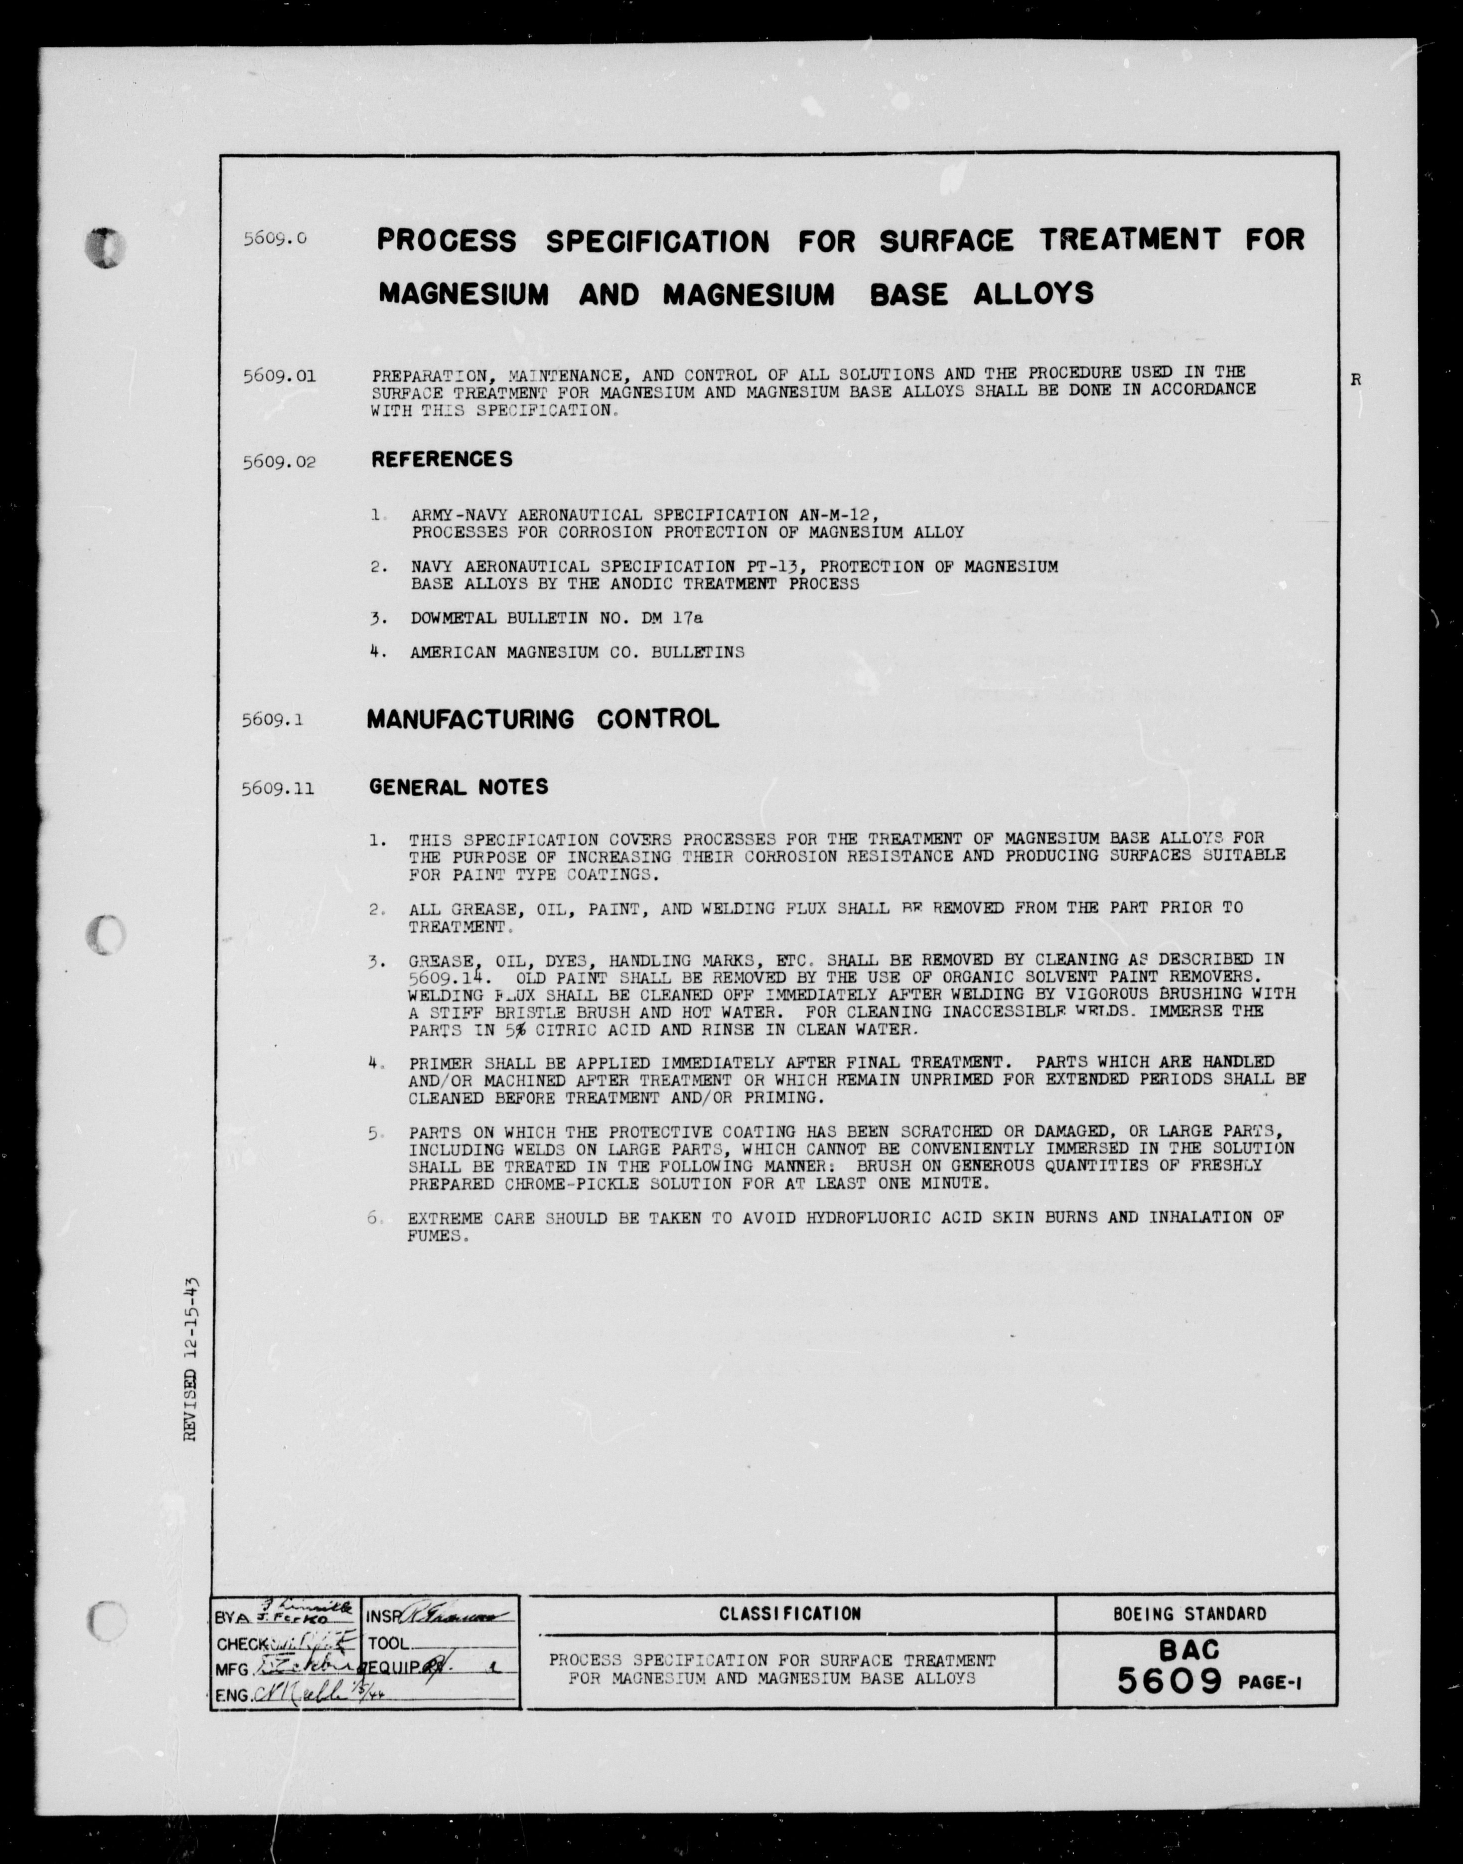 Sample page 1 from AirCorps Library document: Surface Treatment for Magnesium and Magnesium Base Alloys